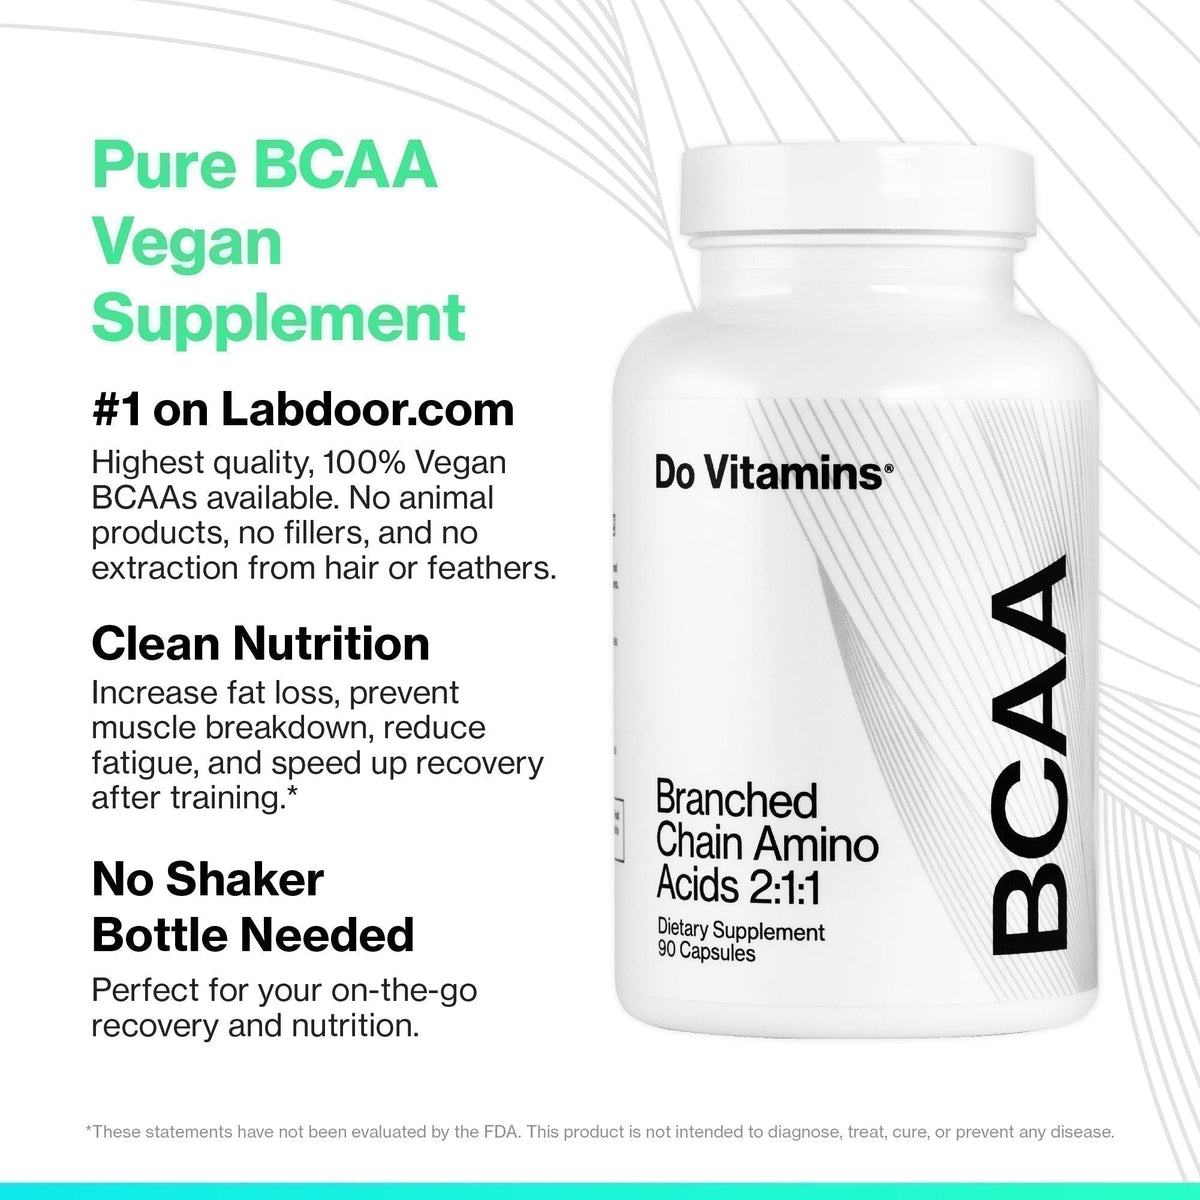 Branched Chain Amino Acids - BCAA Capsules